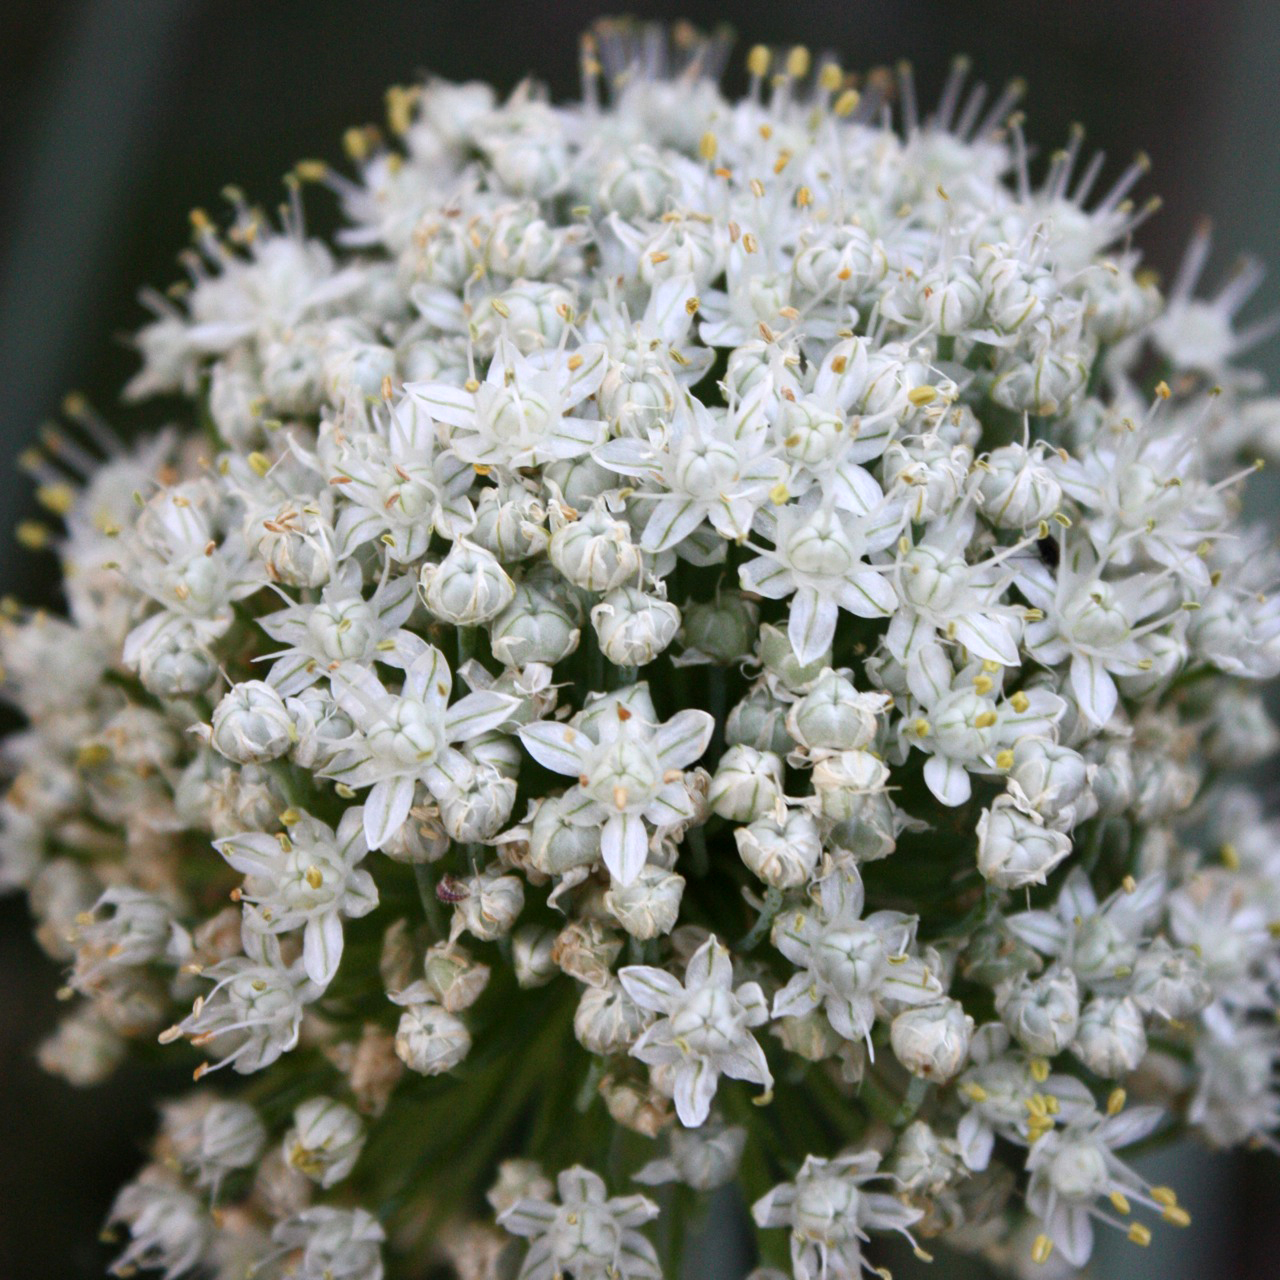 Related With Plants With White Flowers